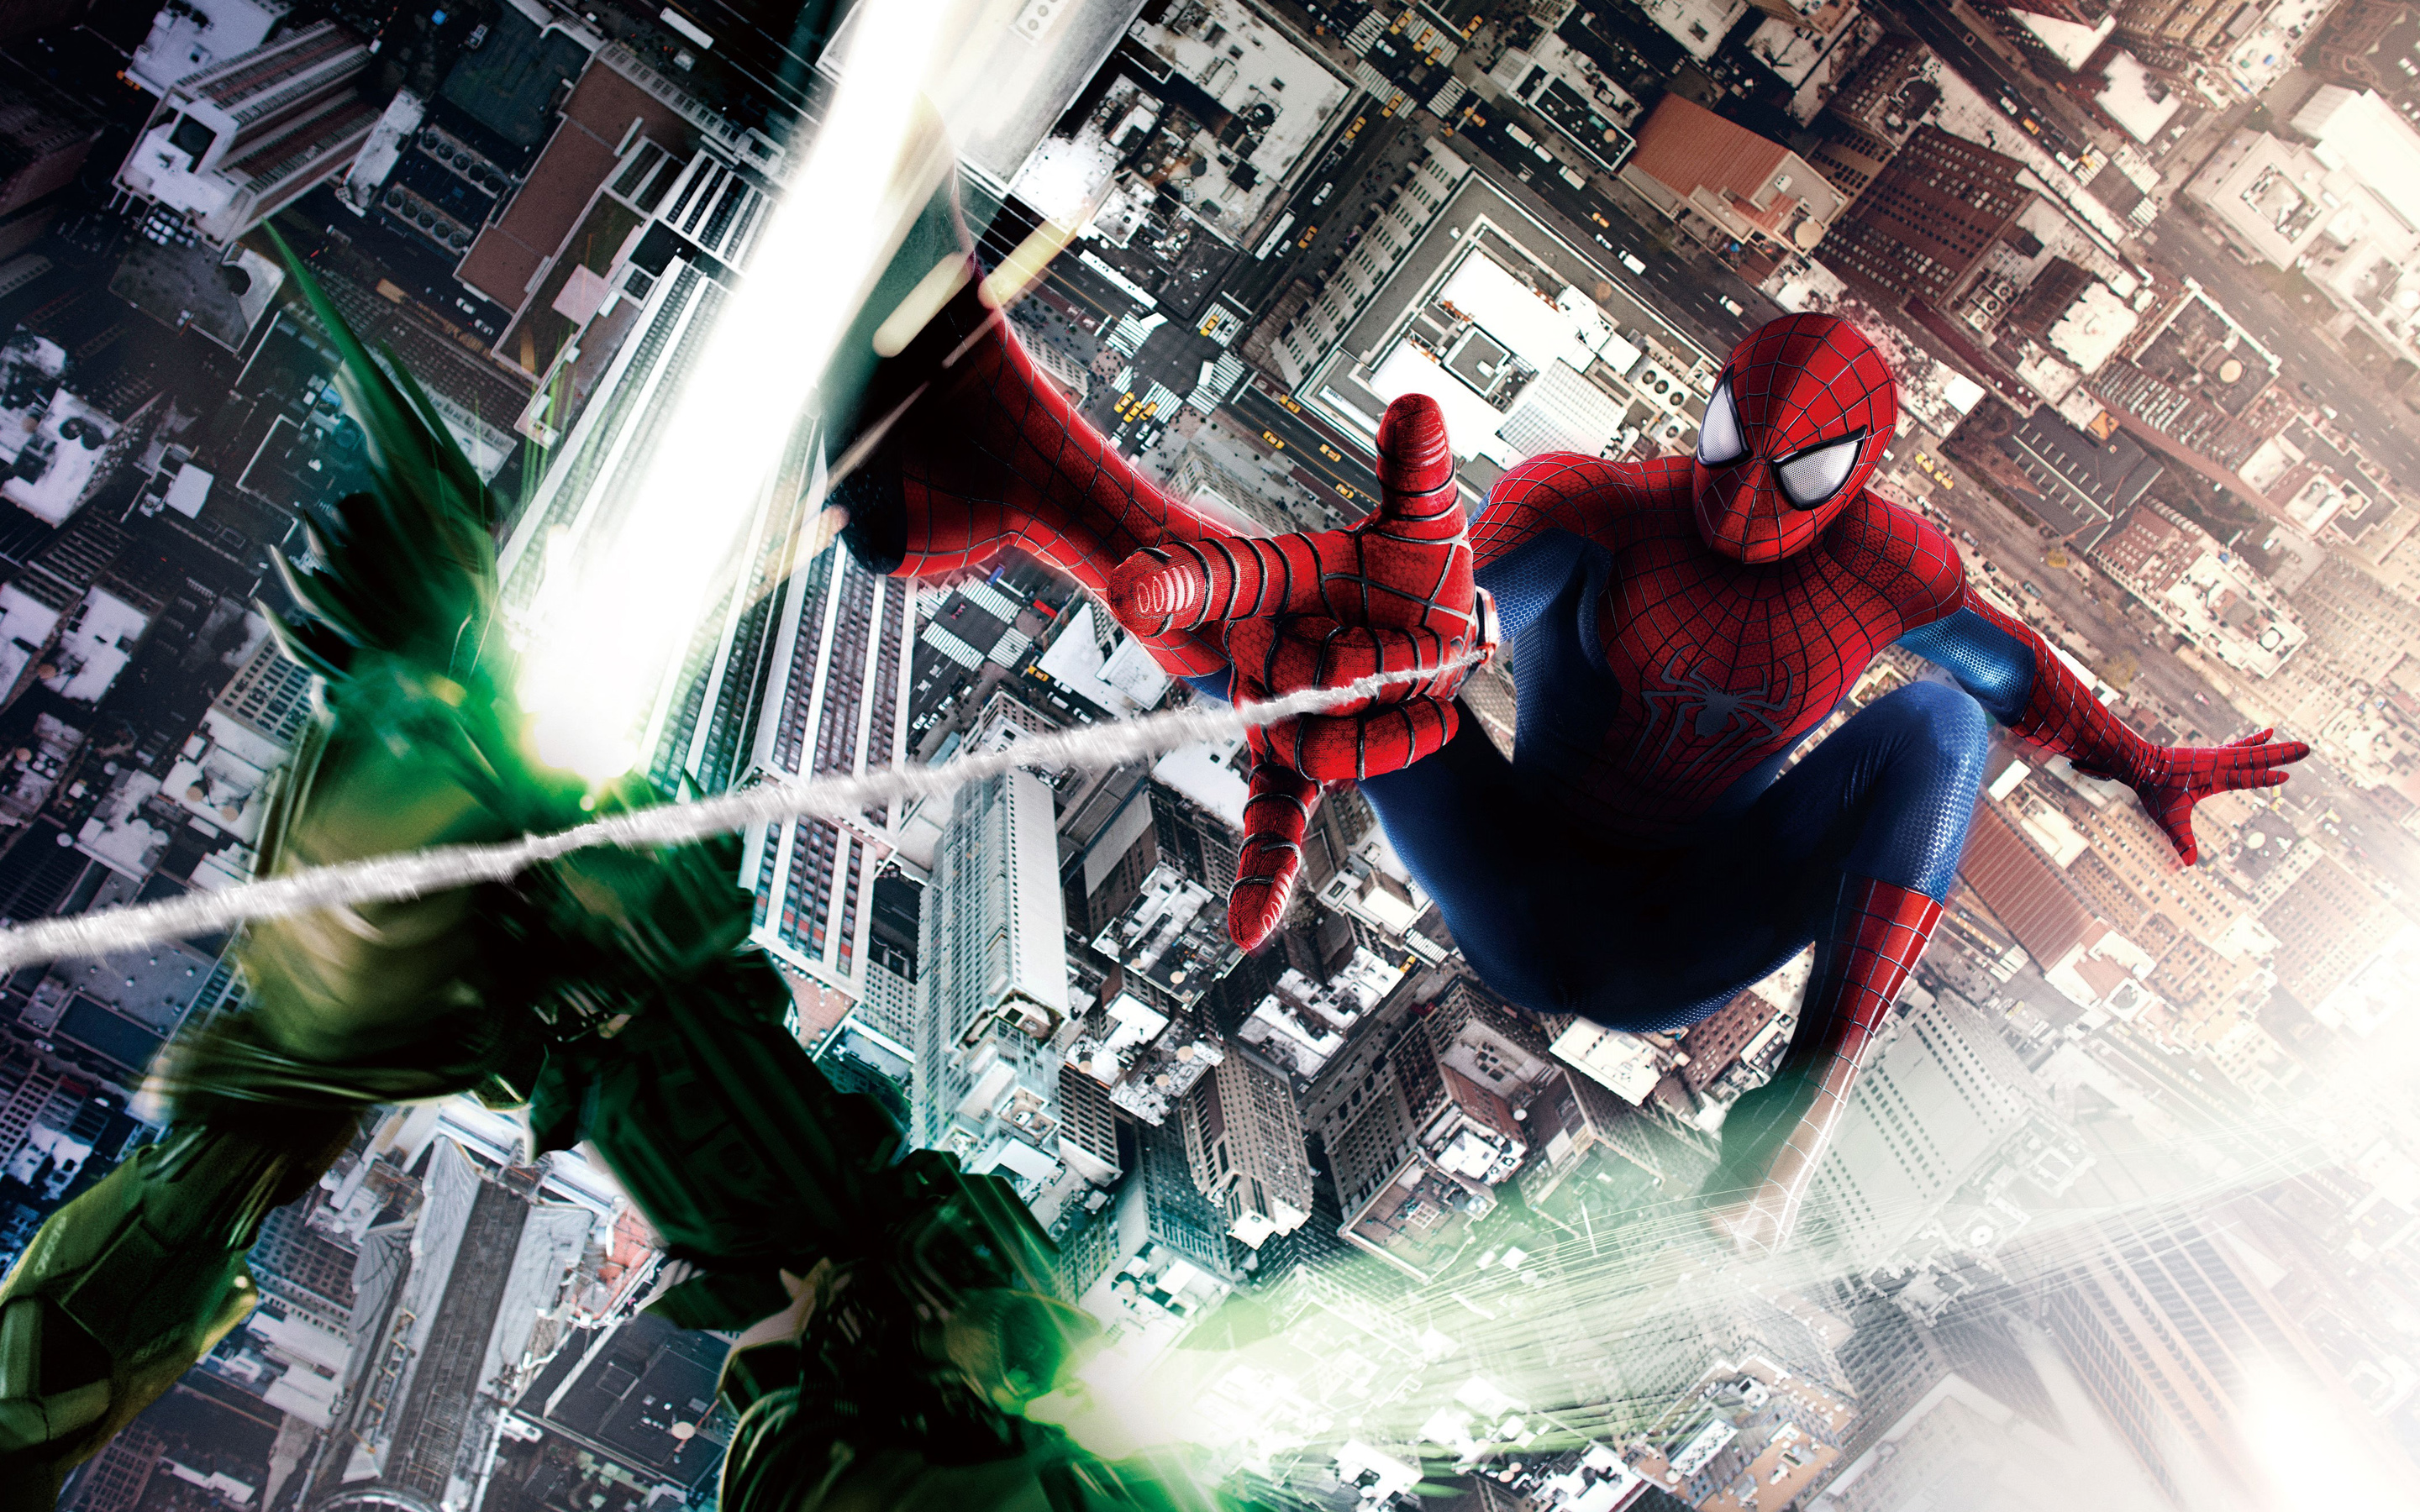 39 The Amazing Spider Man 2 IMAX Wallpapers | HD Wallpapers 887 ...